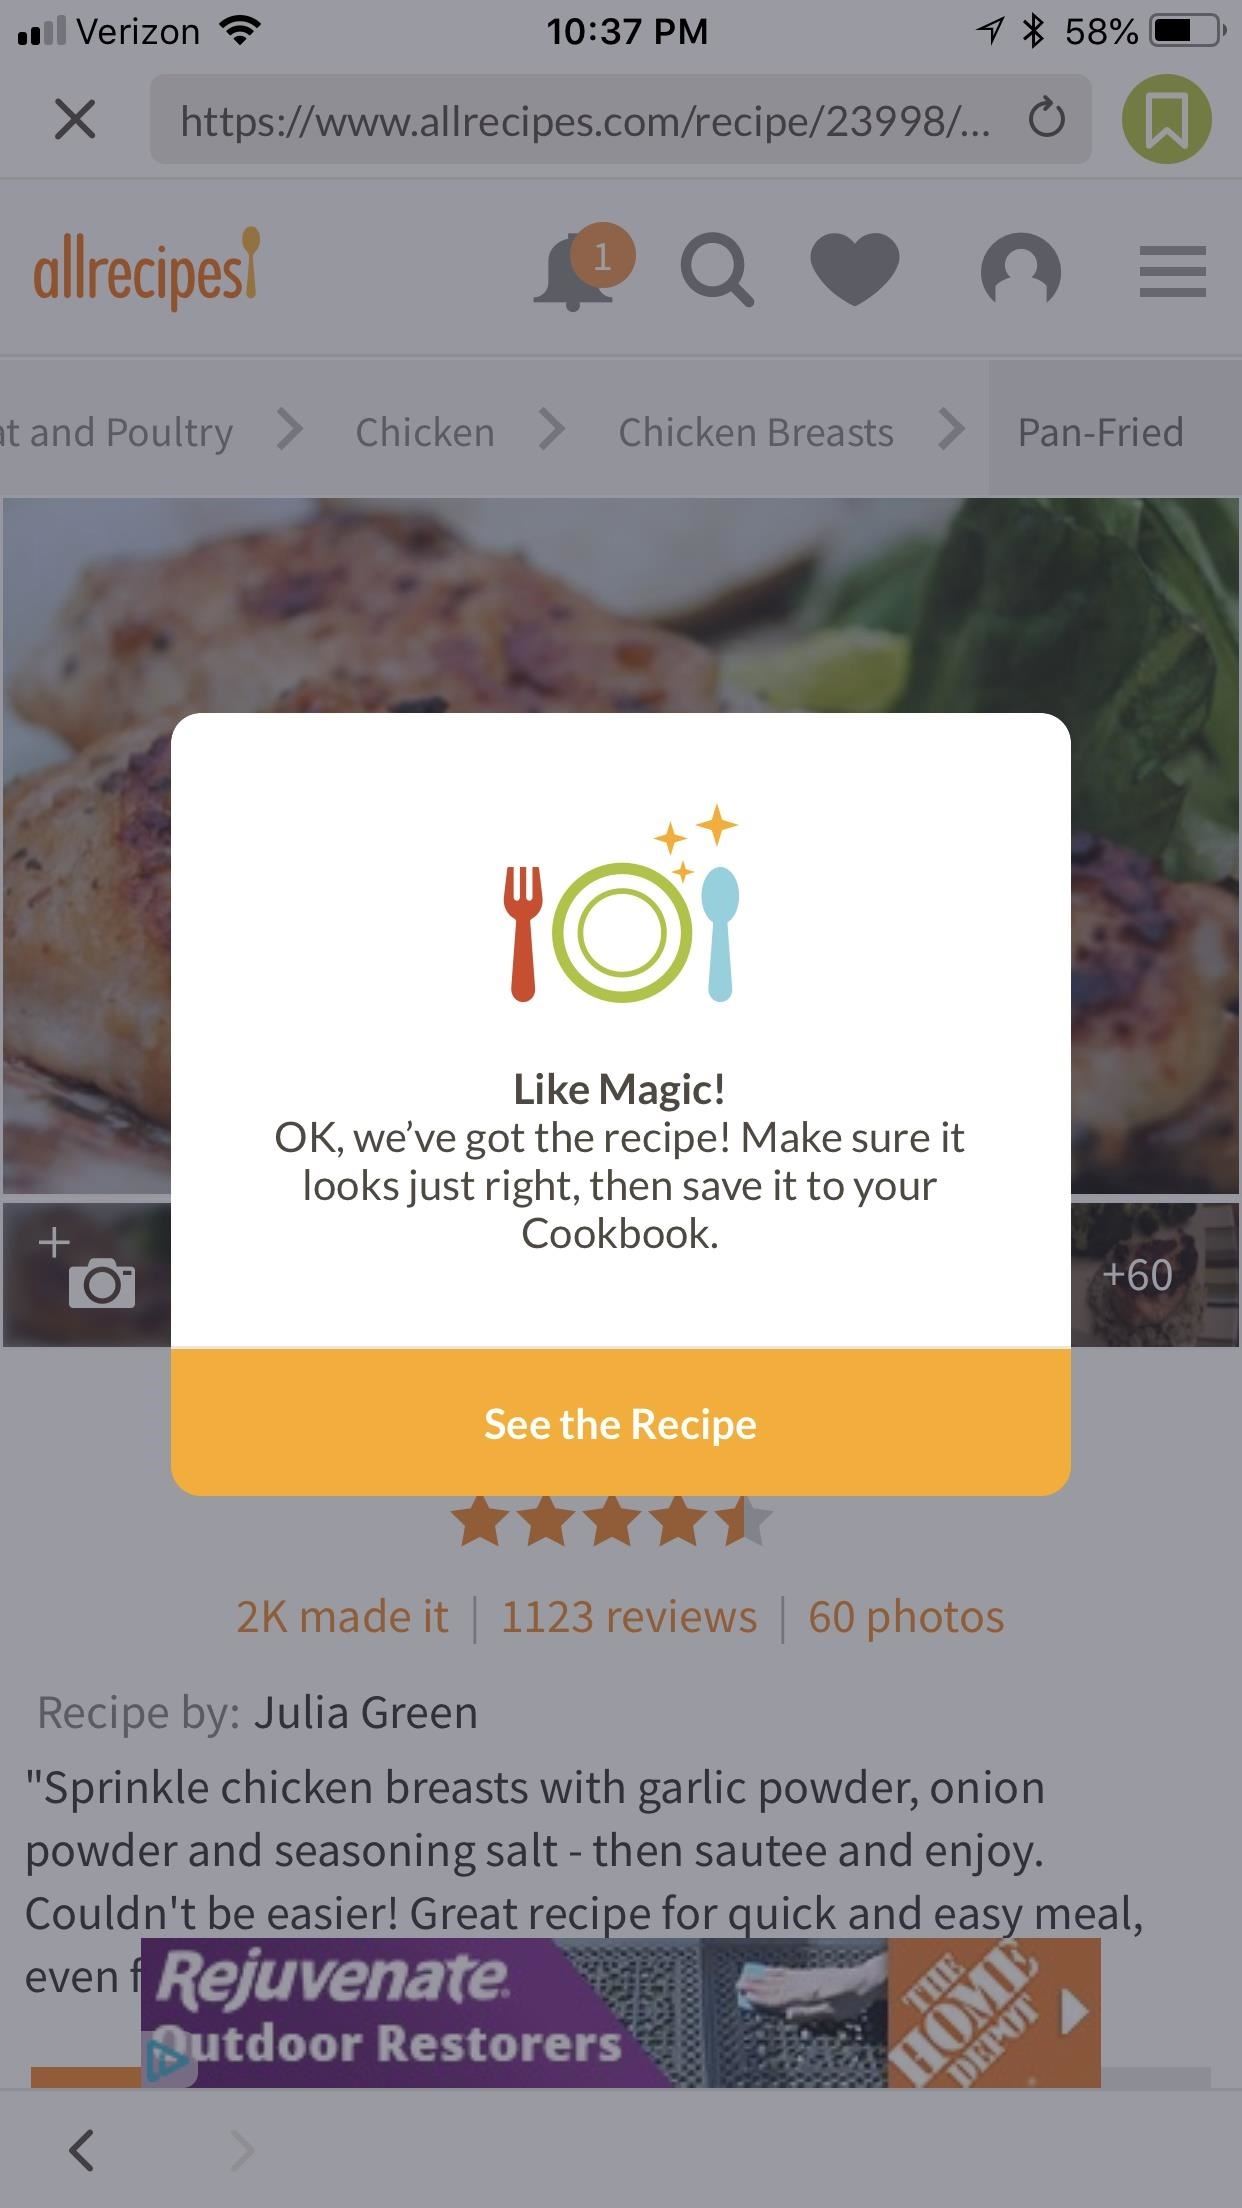 Catalog & Save Recipes from Any Site to Your Smartphone